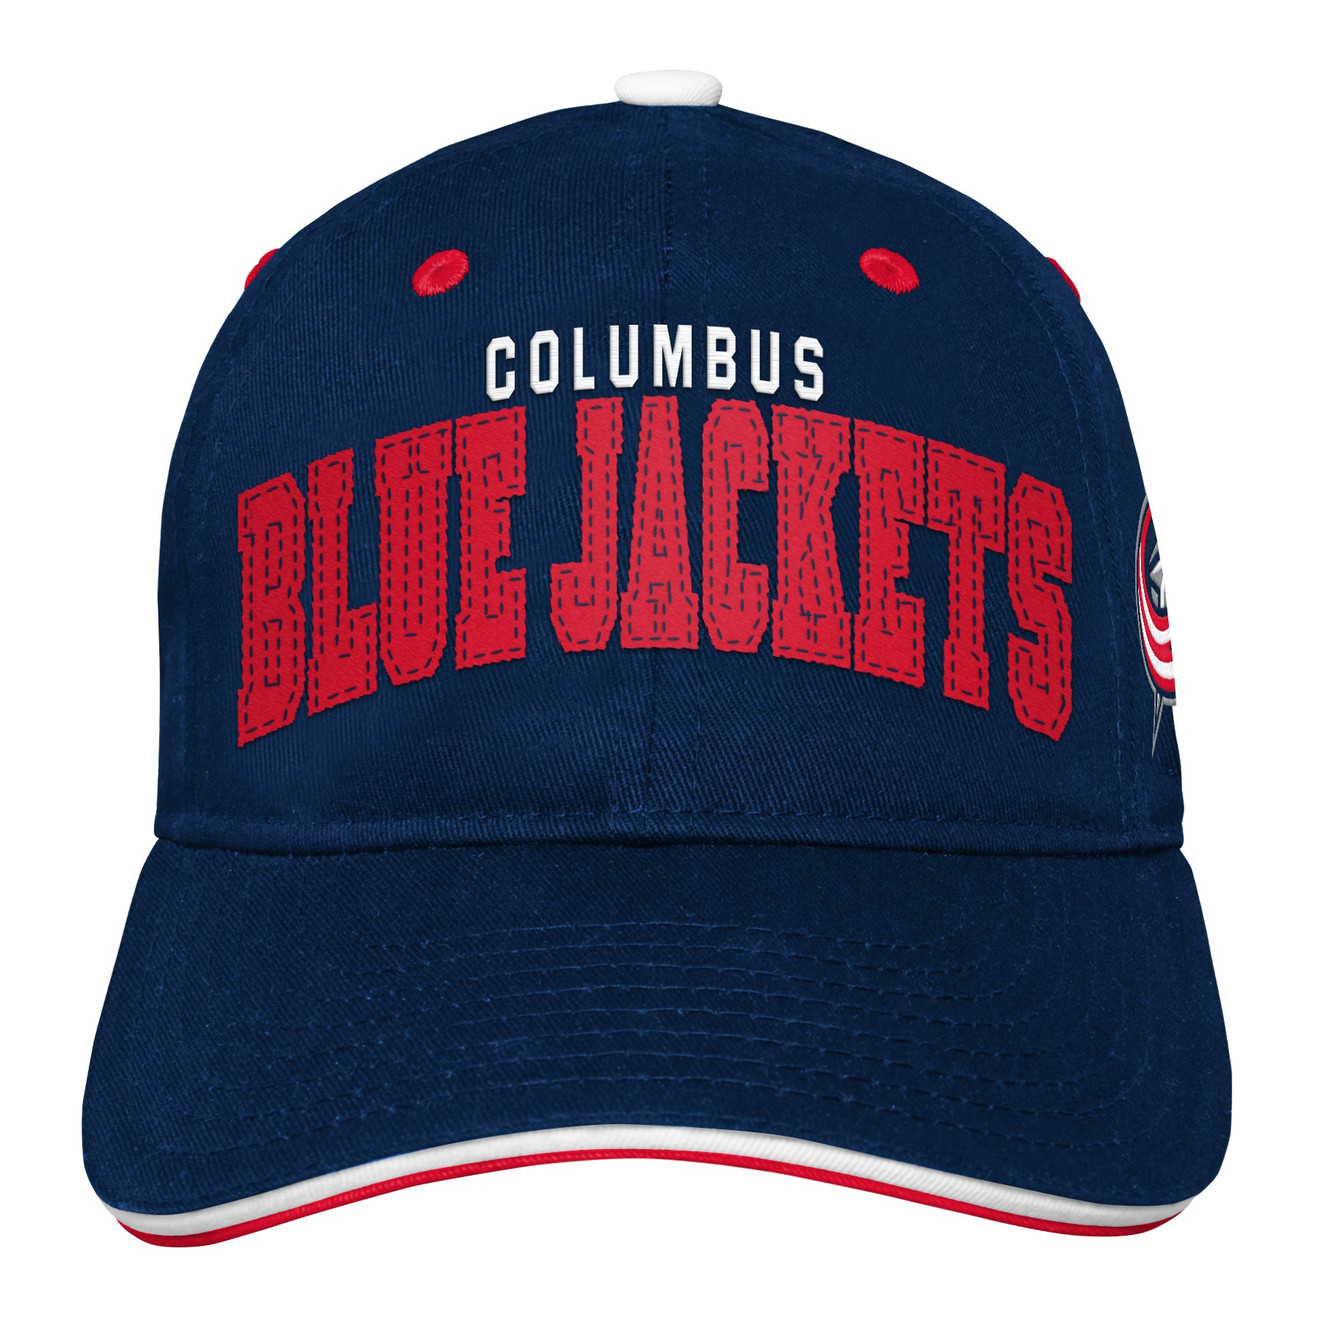 OUT Youth 3rd Jersey Precurved Snap Cap - Columbus Sportservice, LLC